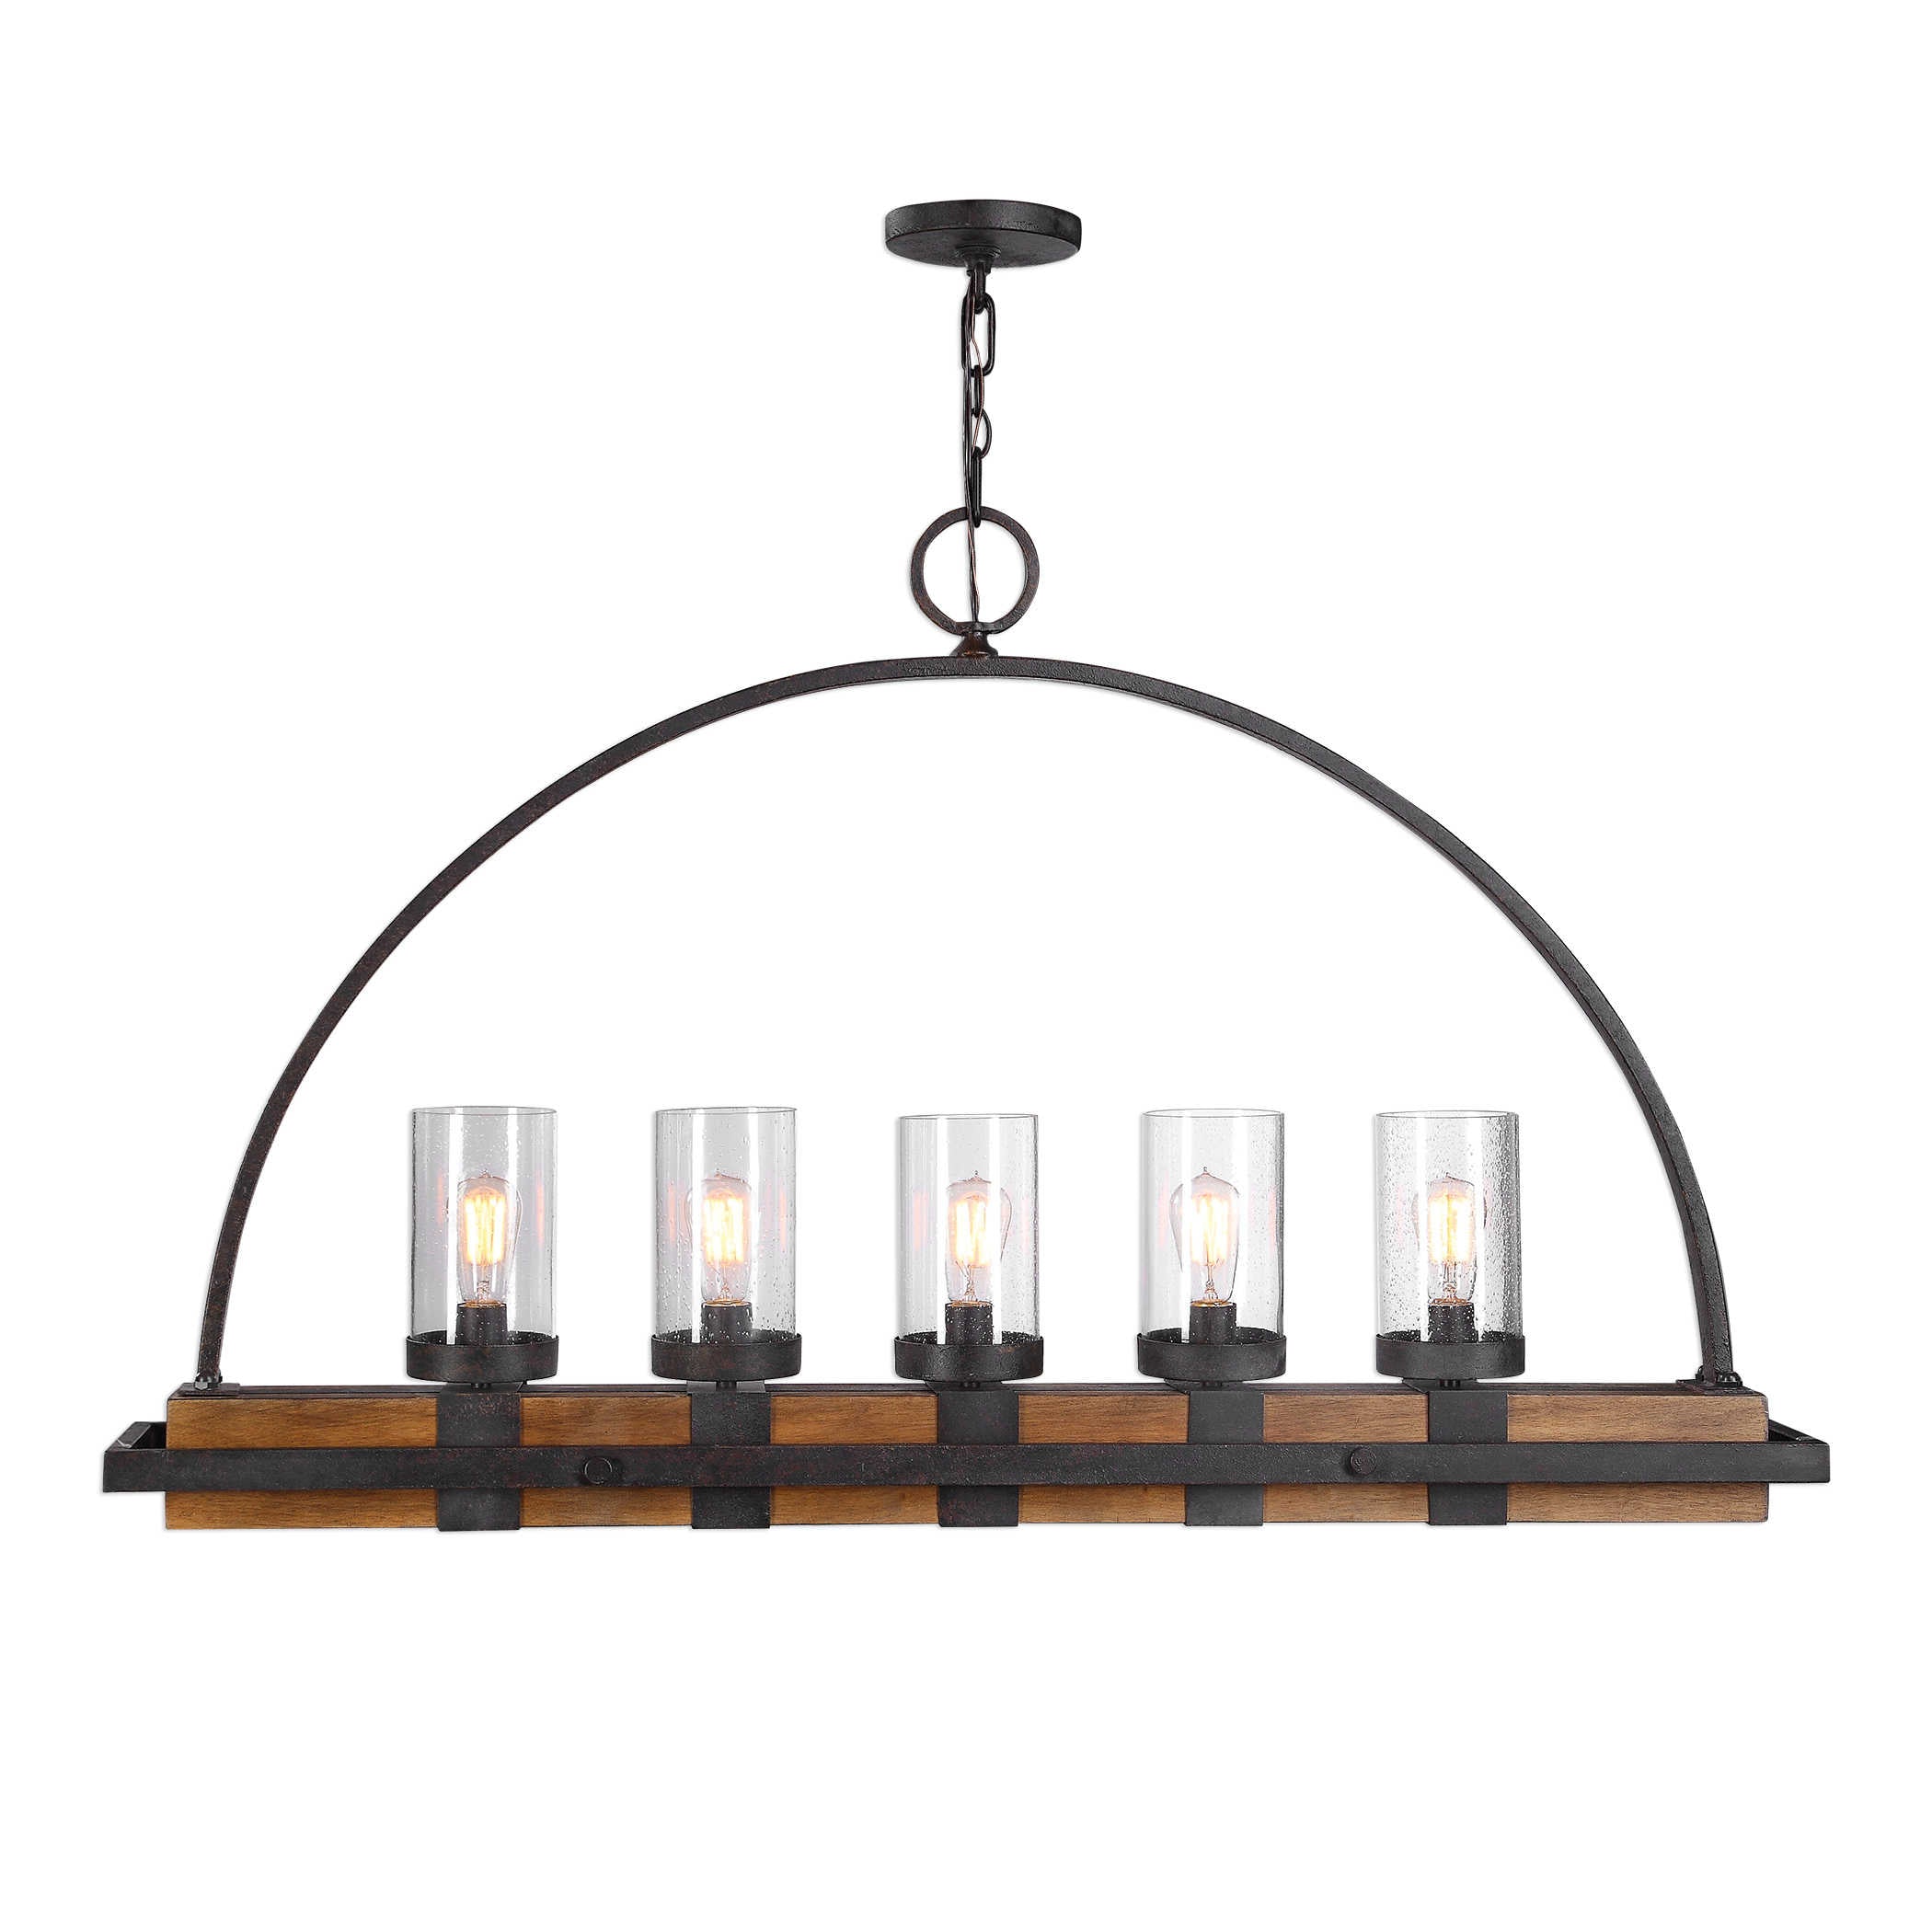 Uttermost Atwood 5 Light Rustic Linear Chandelier Chandeliers Uttermost RUBBER WOOD,GLASS, STEEL  